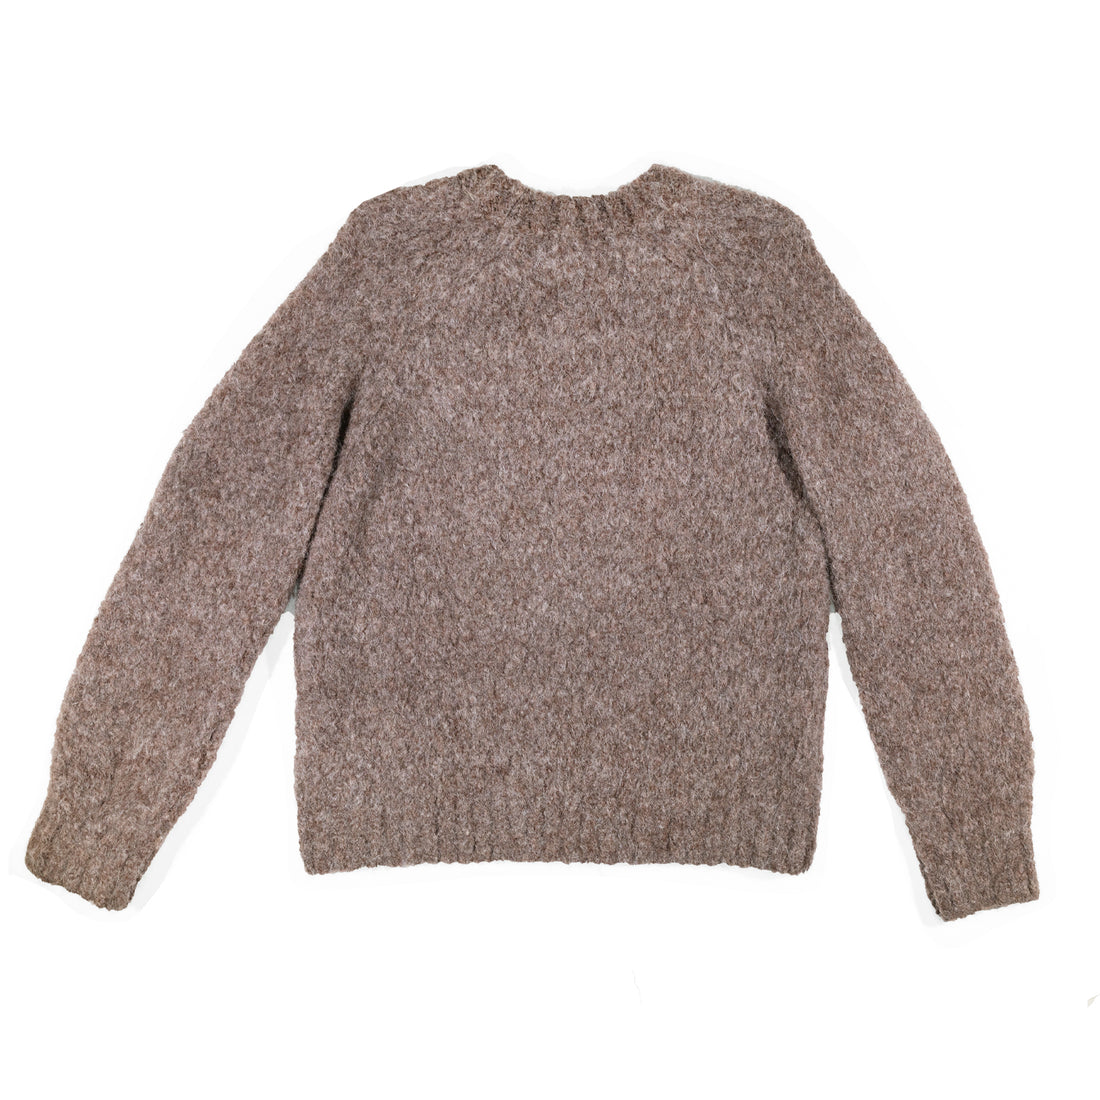 Nothing Written Gom Sweater in Brown